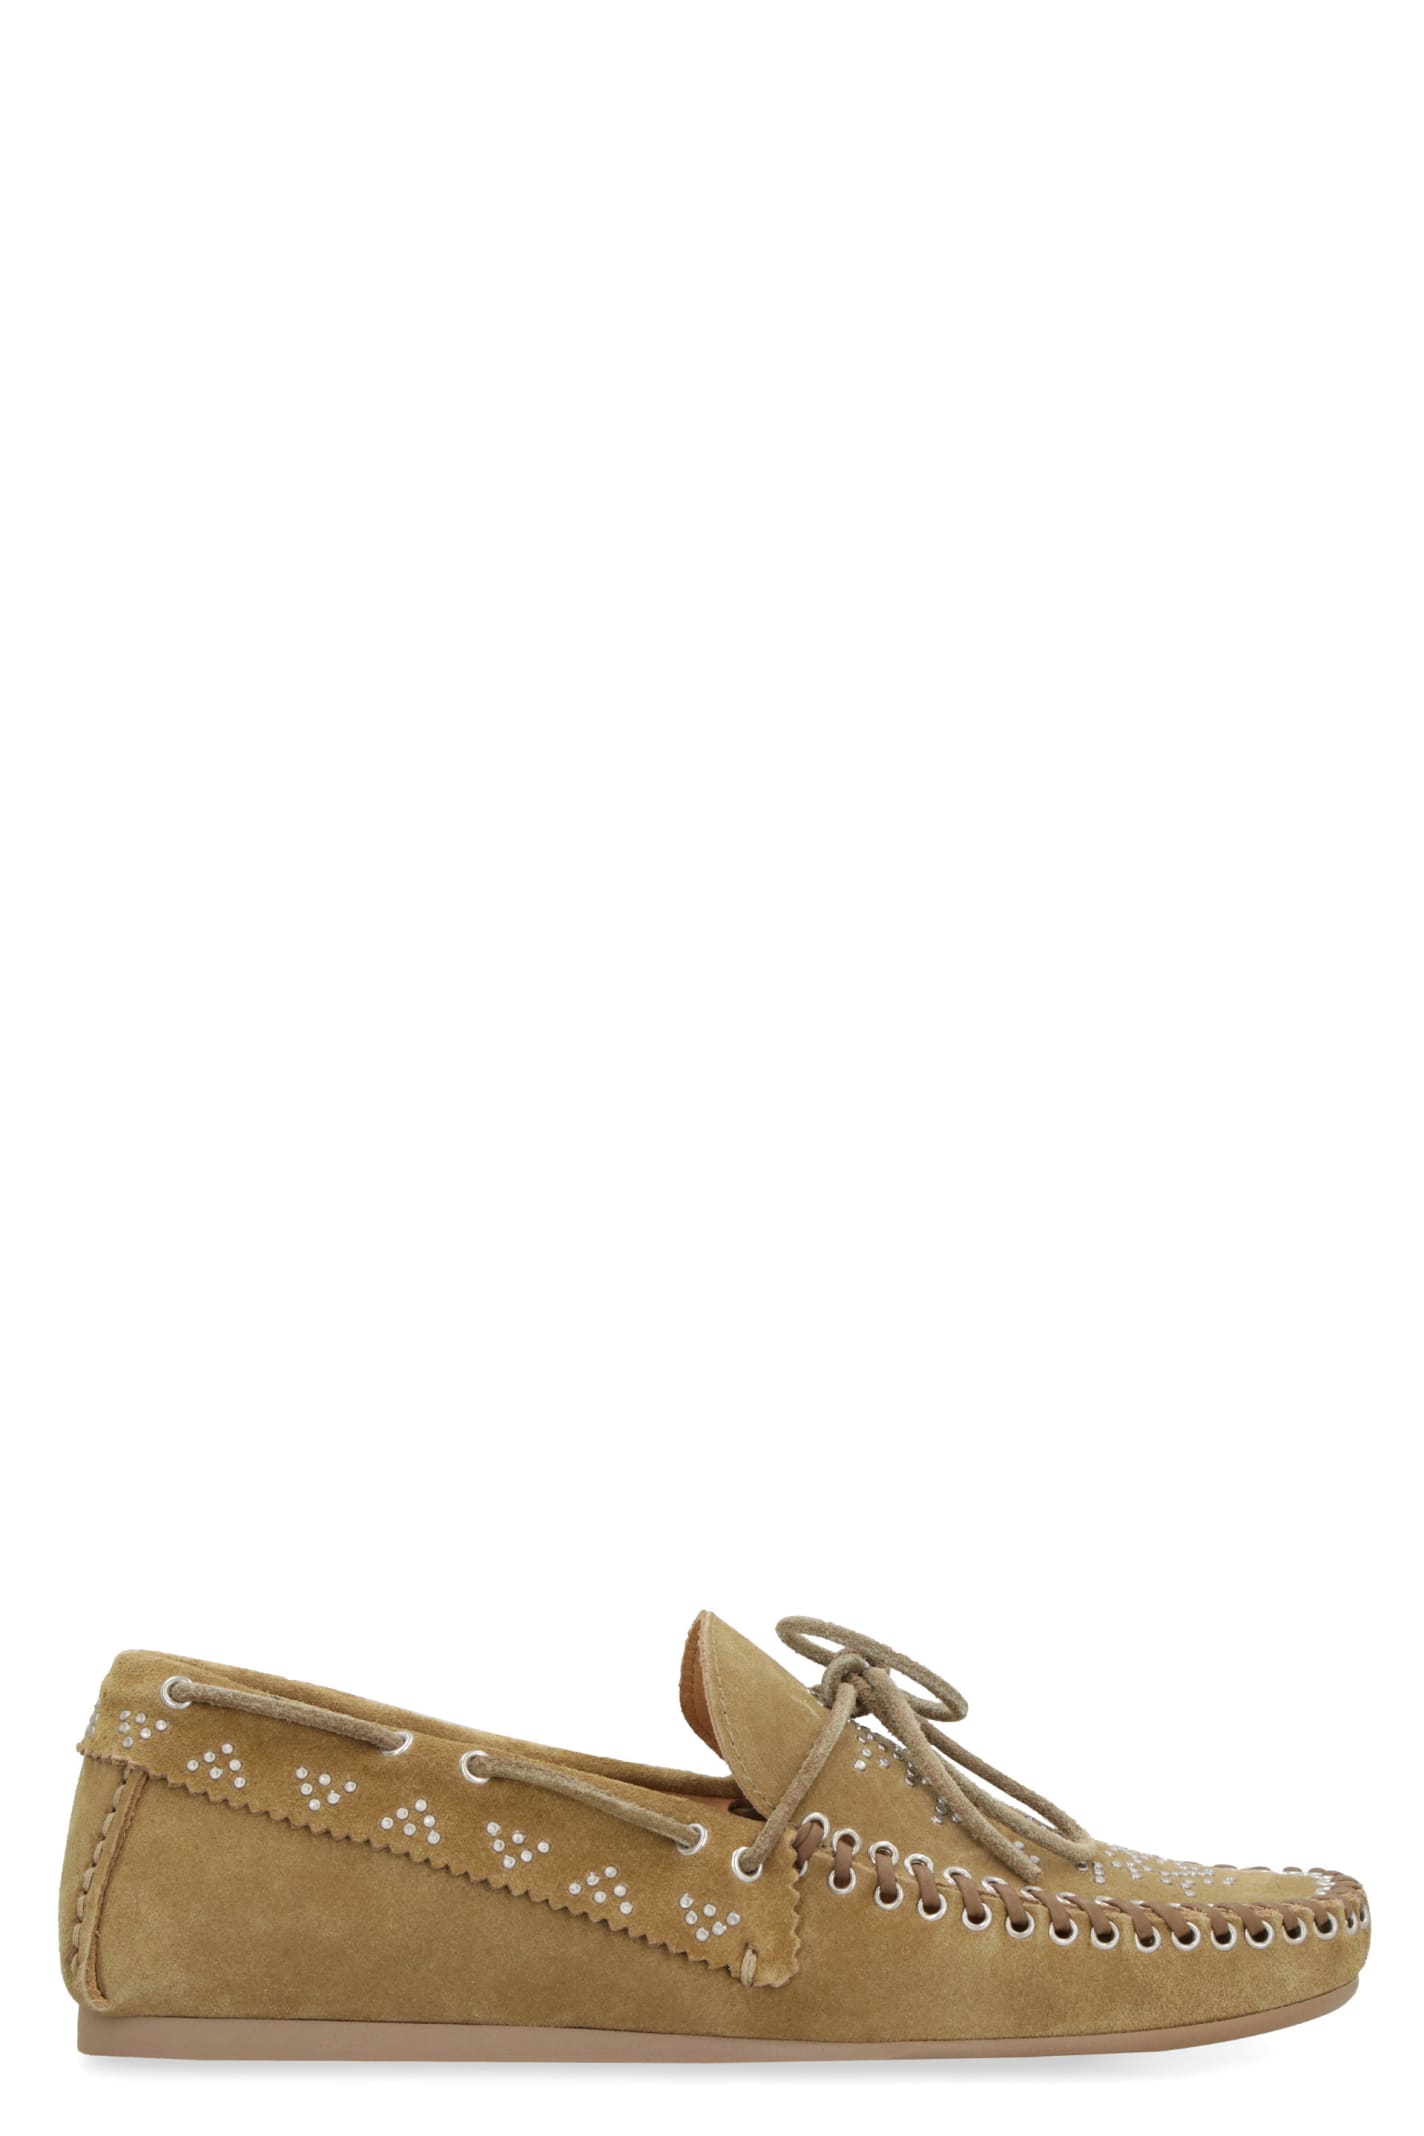 ISABEL MARANT FREEN STUDDED SUEDE LOAFERS